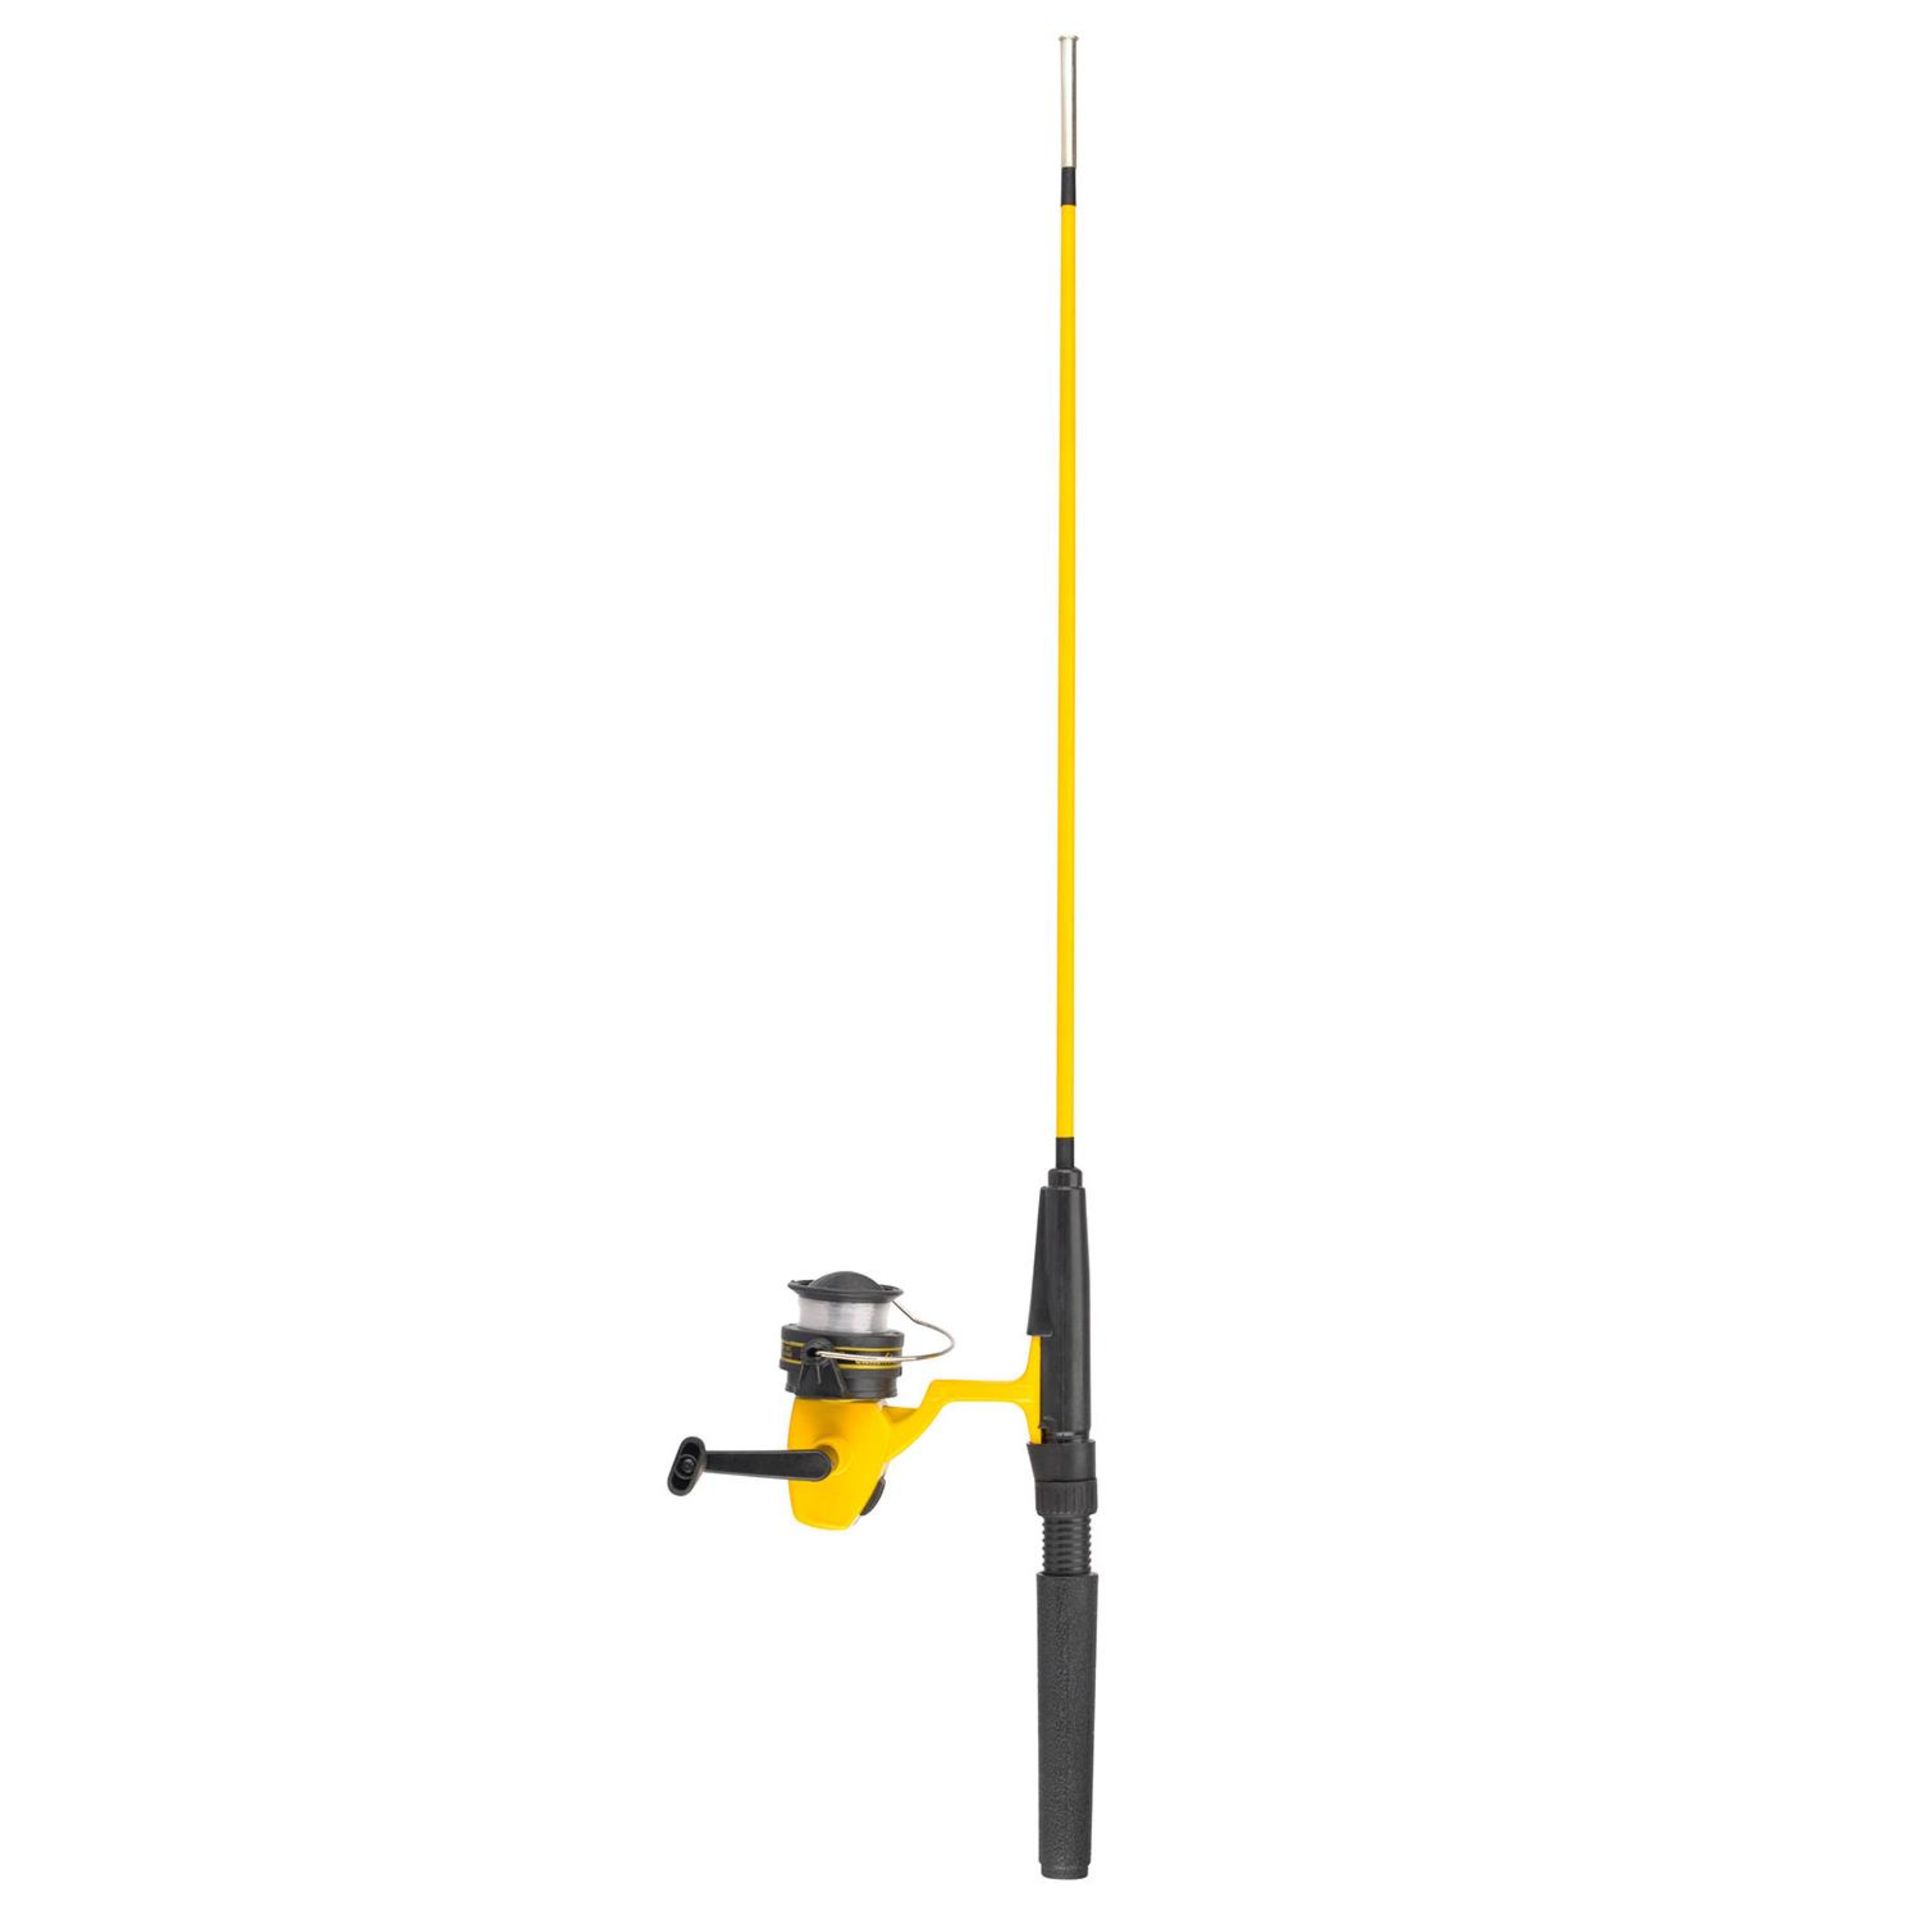 10 X BRAND NEW YELLOW JUNIORS FISHING ROD STARTERS SET - INCLUDES 1.35 M 2 PIECE FISHING ROD / - Image 2 of 6